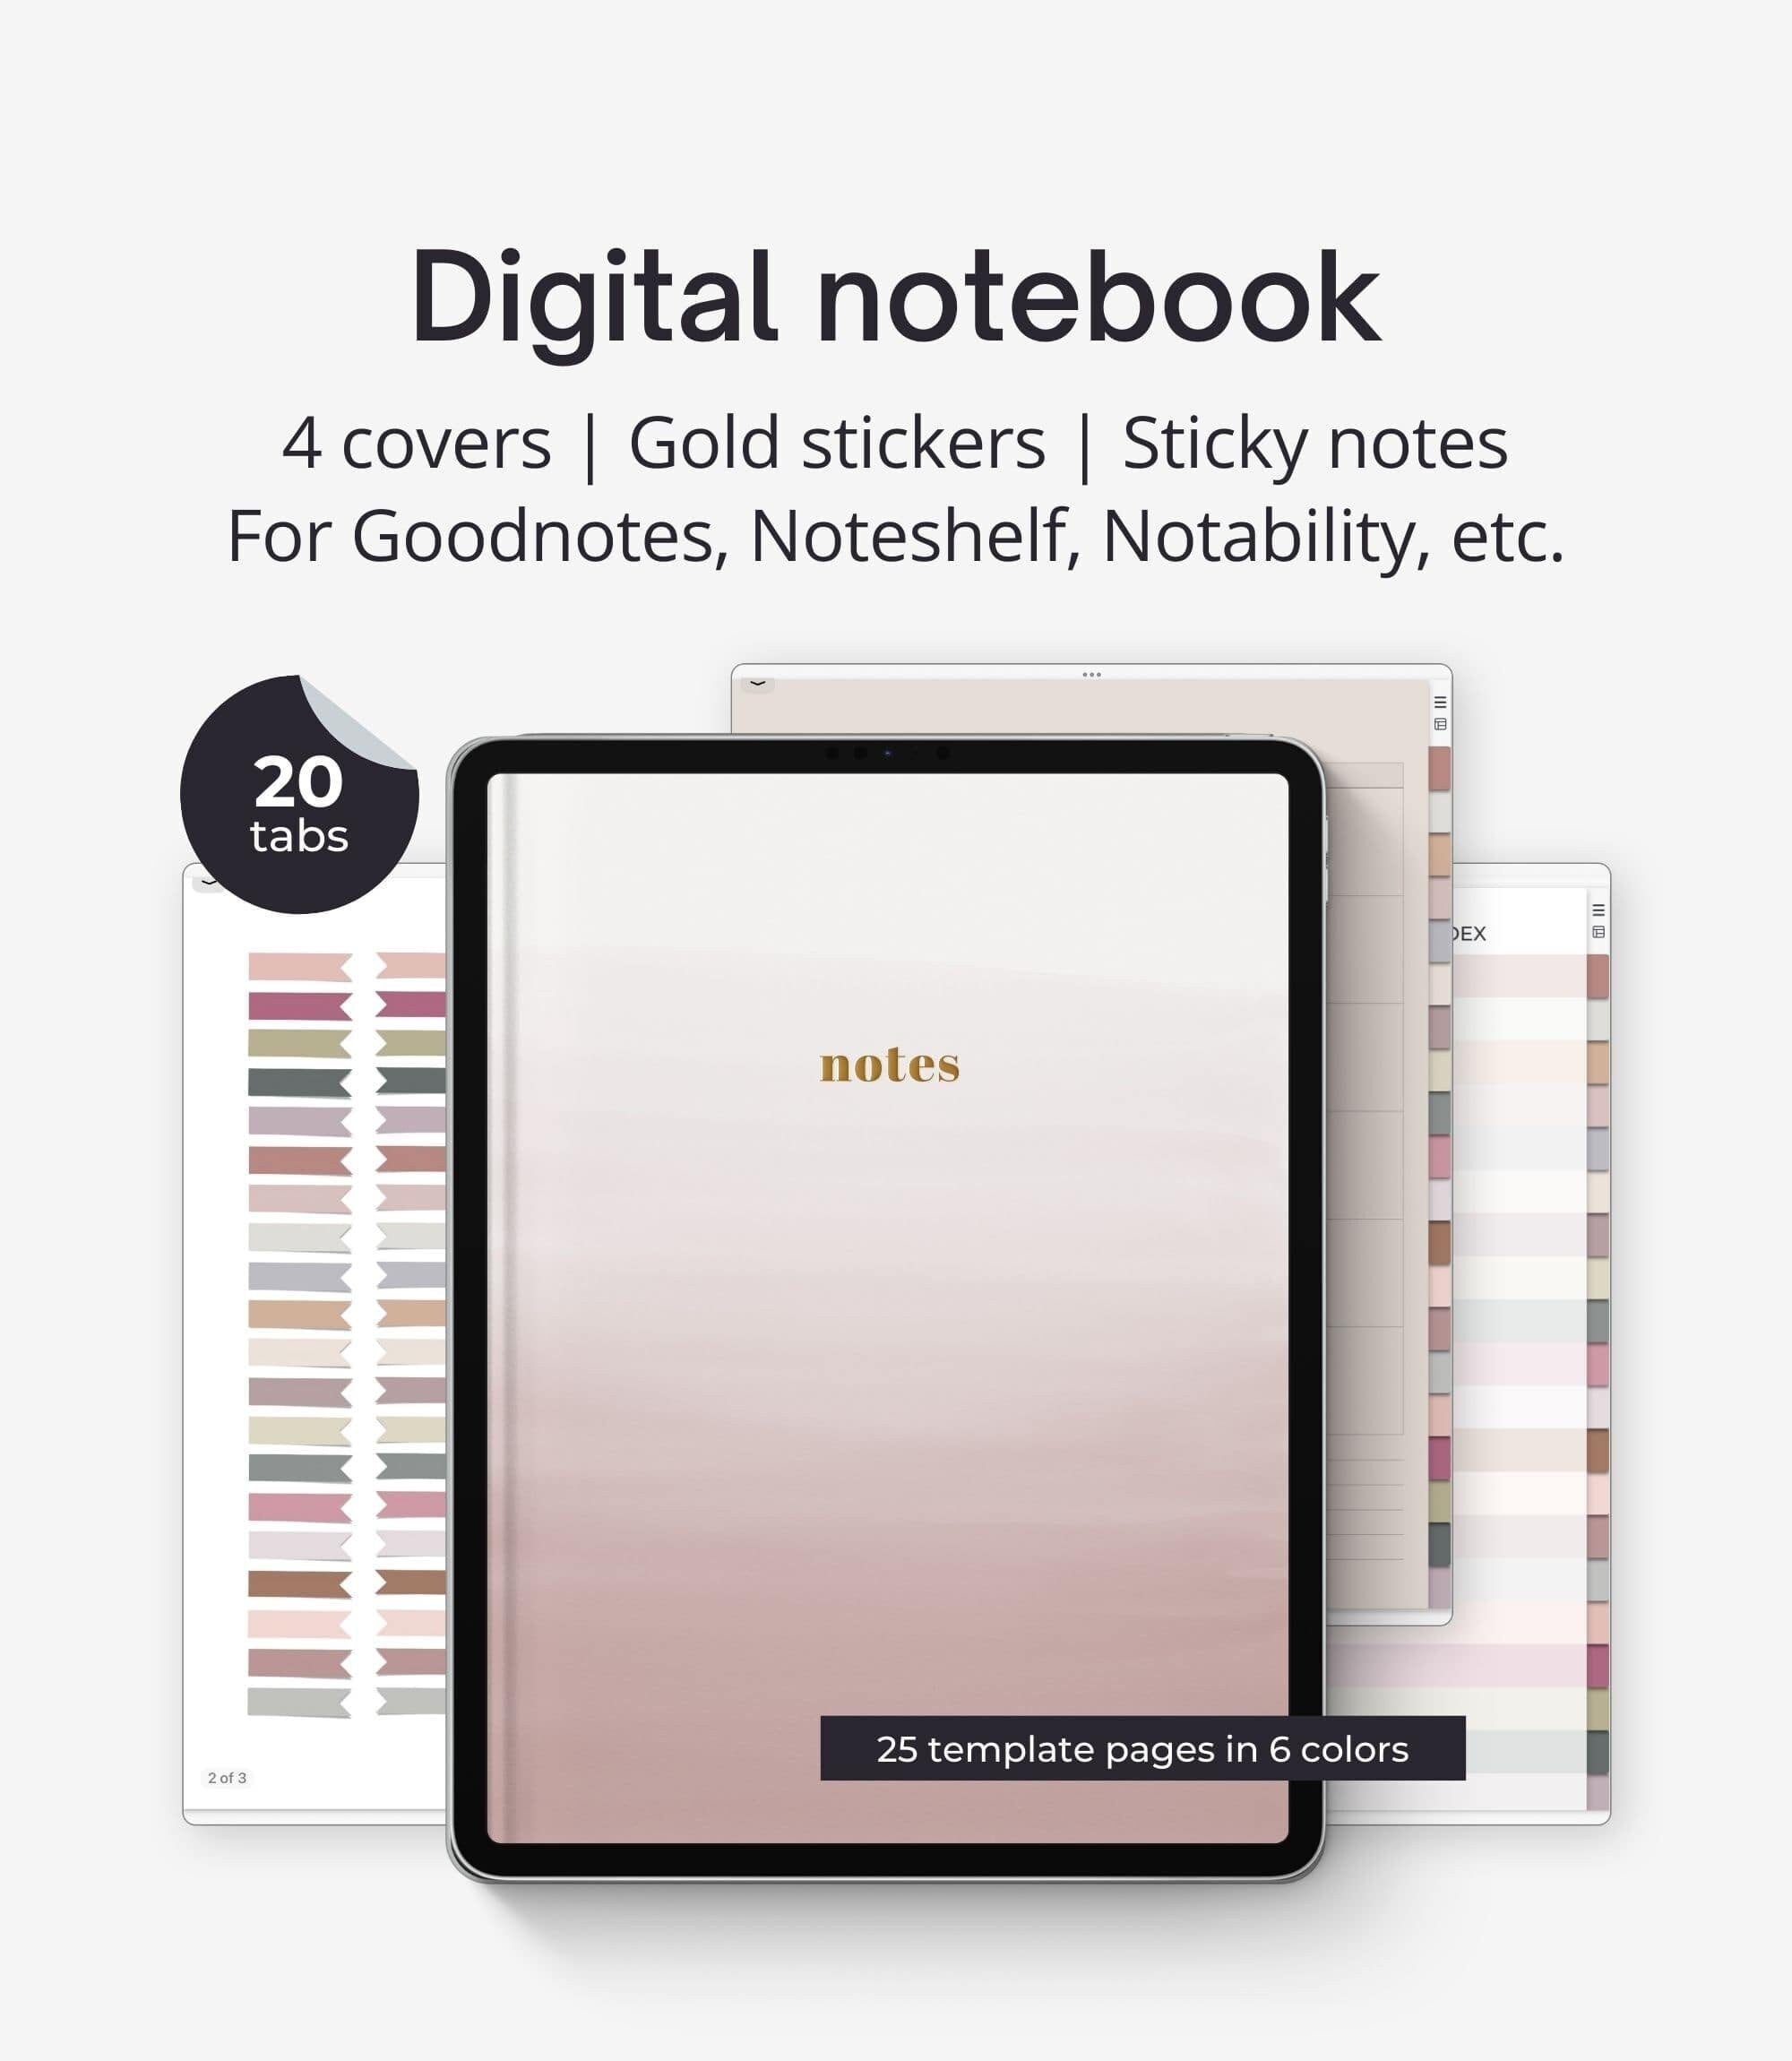 Digital Notebook Goodnotes With Tabs, iPad Digital Journal, 4 Watercolor  Covers, Gold Digital Stickers to Customize Covers, 20 Linked Tabs - Etsy UK